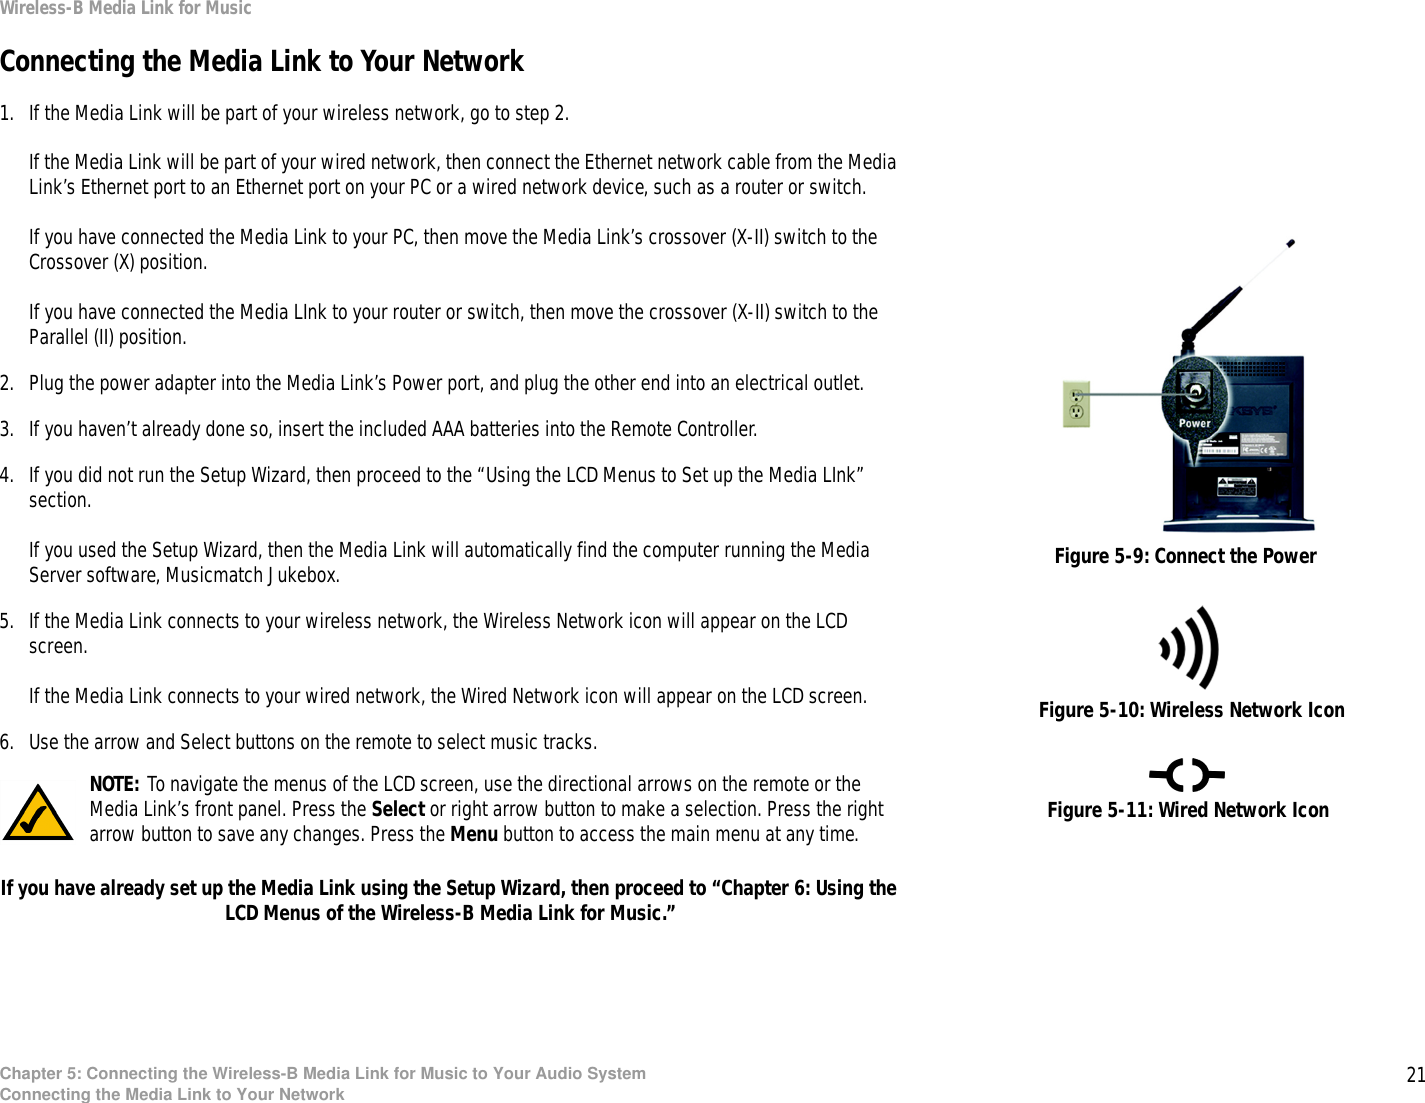 21Chapter 5: Connecting the Wireless-B Media Link for Music to Your Audio SystemConnecting the Media Link to Your NetworkWireless-B Media Link for MusicConnecting the Media Link to Your Network1. If the Media Link will be part of your wireless network, go to step 2.If the Media Link will be part of your wired network, then connect the Ethernet network cable from the Media Link’s Ethernet port to an Ethernet port on your PC or a wired network device, such as a router or switch. If you have connected the Media Link to your PC, then move the Media Link’s crossover (X-II) switch to the Crossover (X) position.If you have connected the Media LInk to your router or switch, then move the crossover (X-II) switch to the Parallel (II) position.2. Plug the power adapter into the Media Link’s Power port, and plug the other end into an electrical outlet.3. If you haven’t already done so, insert the included AAA batteries into the Remote Controller. 4. If you did not run the Setup Wizard, then proceed to the “Using the LCD Menus to Set up the Media LInk” section.If you used the Setup Wizard, then the Media Link will automatically find the computer running the Media Server software, Musicmatch Jukebox.5. If the Media Link connects to your wireless network, the Wireless Network icon will appear on the LCD screen.If the Media Link connects to your wired network, the Wired Network icon will appear on the LCD screen.6. Use the arrow and Select buttons on the remote to select music tracks.If you have already set up the Media Link using the Setup Wizard, then proceed to “Chapter 6: Using the LCD Menus of the Wireless-B Media Link for Music.”Figure 5-10: Wireless Network IconFigure 5-11: Wired Network IconNOTE: To navigate the menus of the LCD screen, use the directional arrows on the remote or the Media Link’s front panel. Press the Select or right arrow button to make a selection. Press the right arrow button to save any changes. Press the Menu button to access the main menu at any time.Figure 5-9: Connect the Power